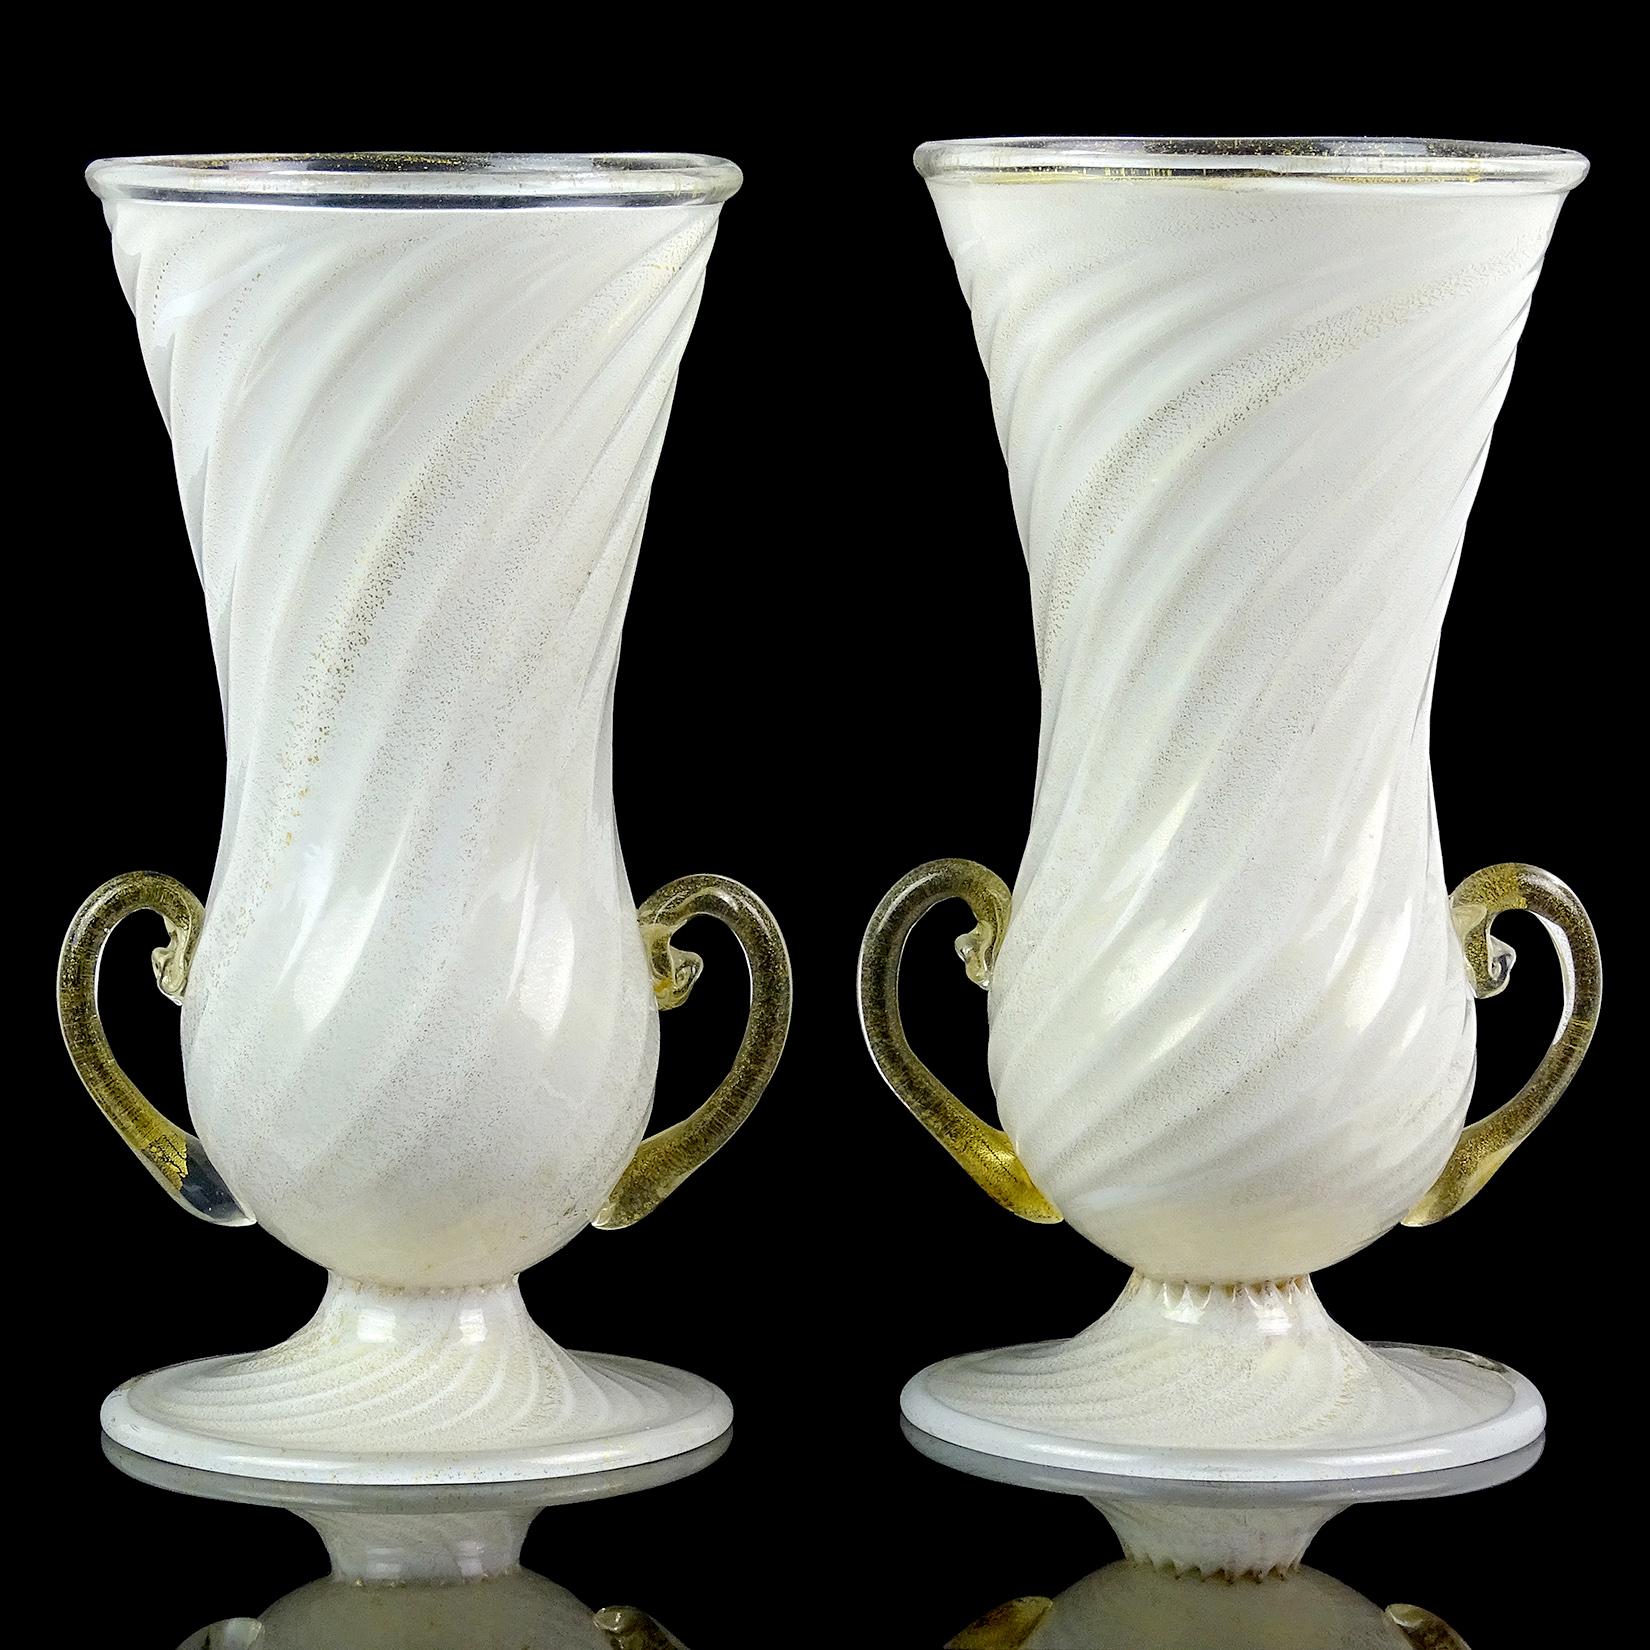 Beautiful and rare, matching antique Murano hand blown white and gold flecks Italian art glass double handles flower vases. Documented to the Ferro Toso Barovier Vetreria Artistiche Riunite S. A. company, circa 1939-1942. One of the vases still